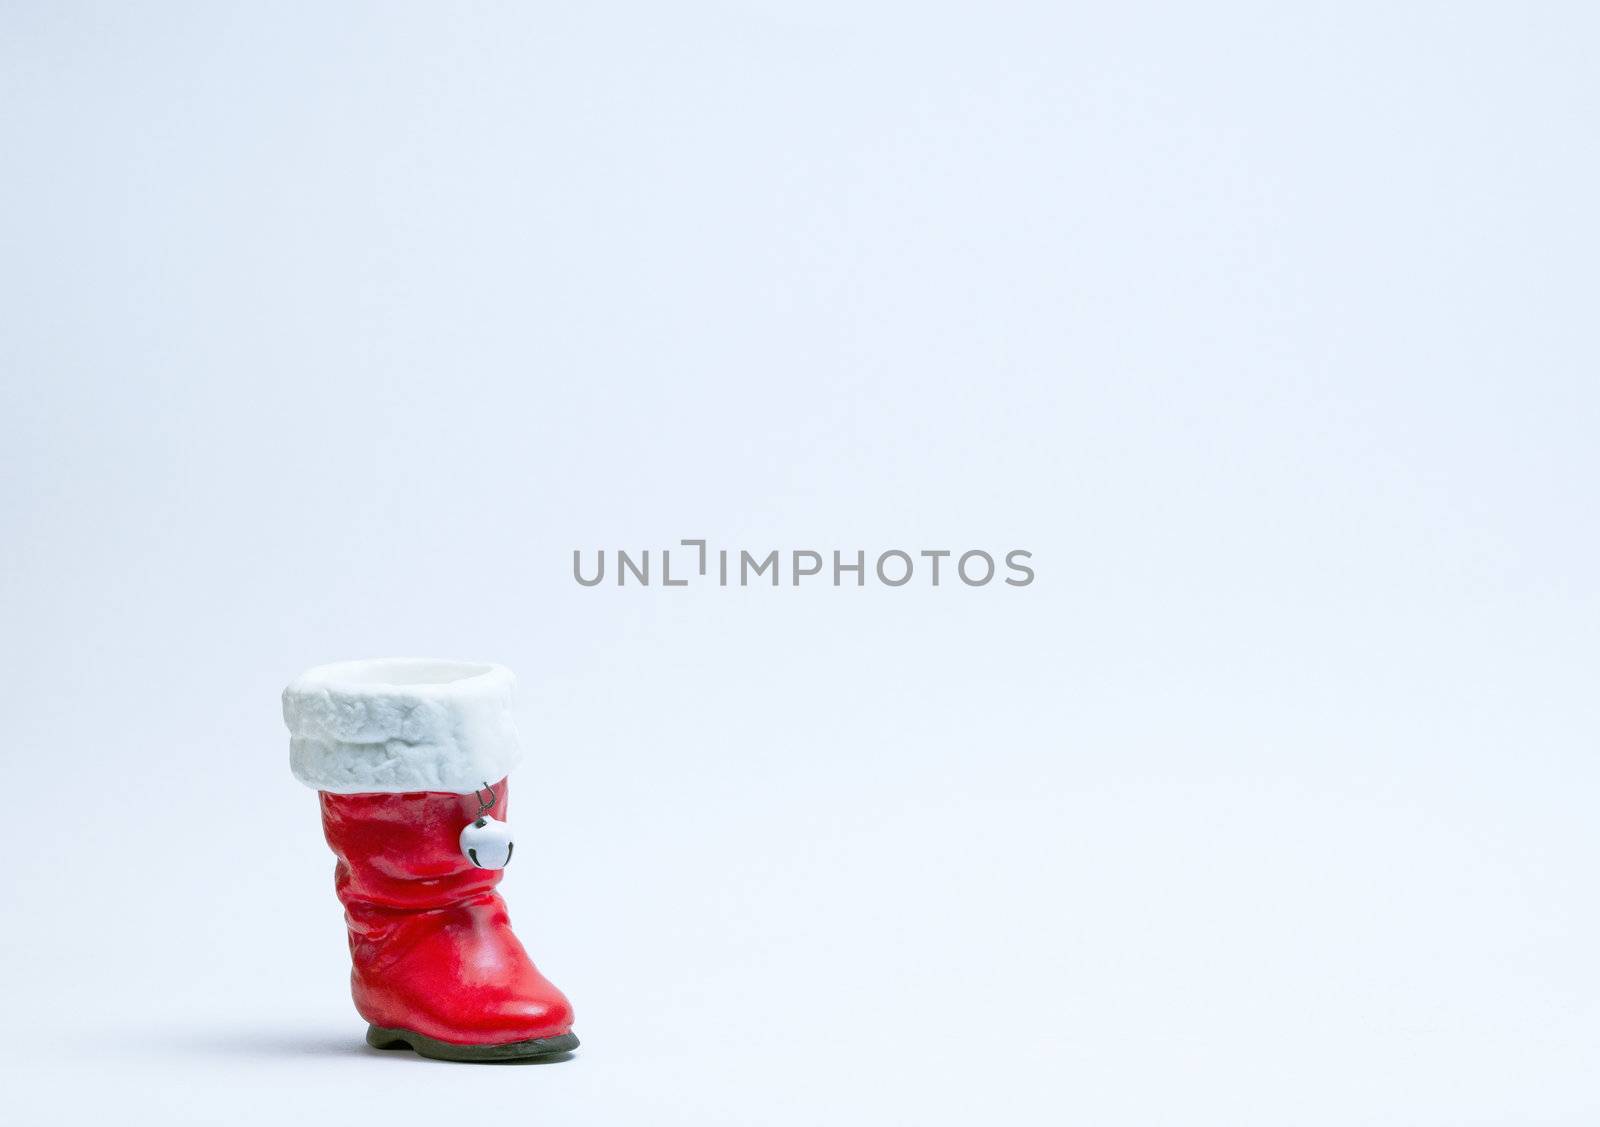 Santas Red Boot Christmas Tree Decoration on a white background.